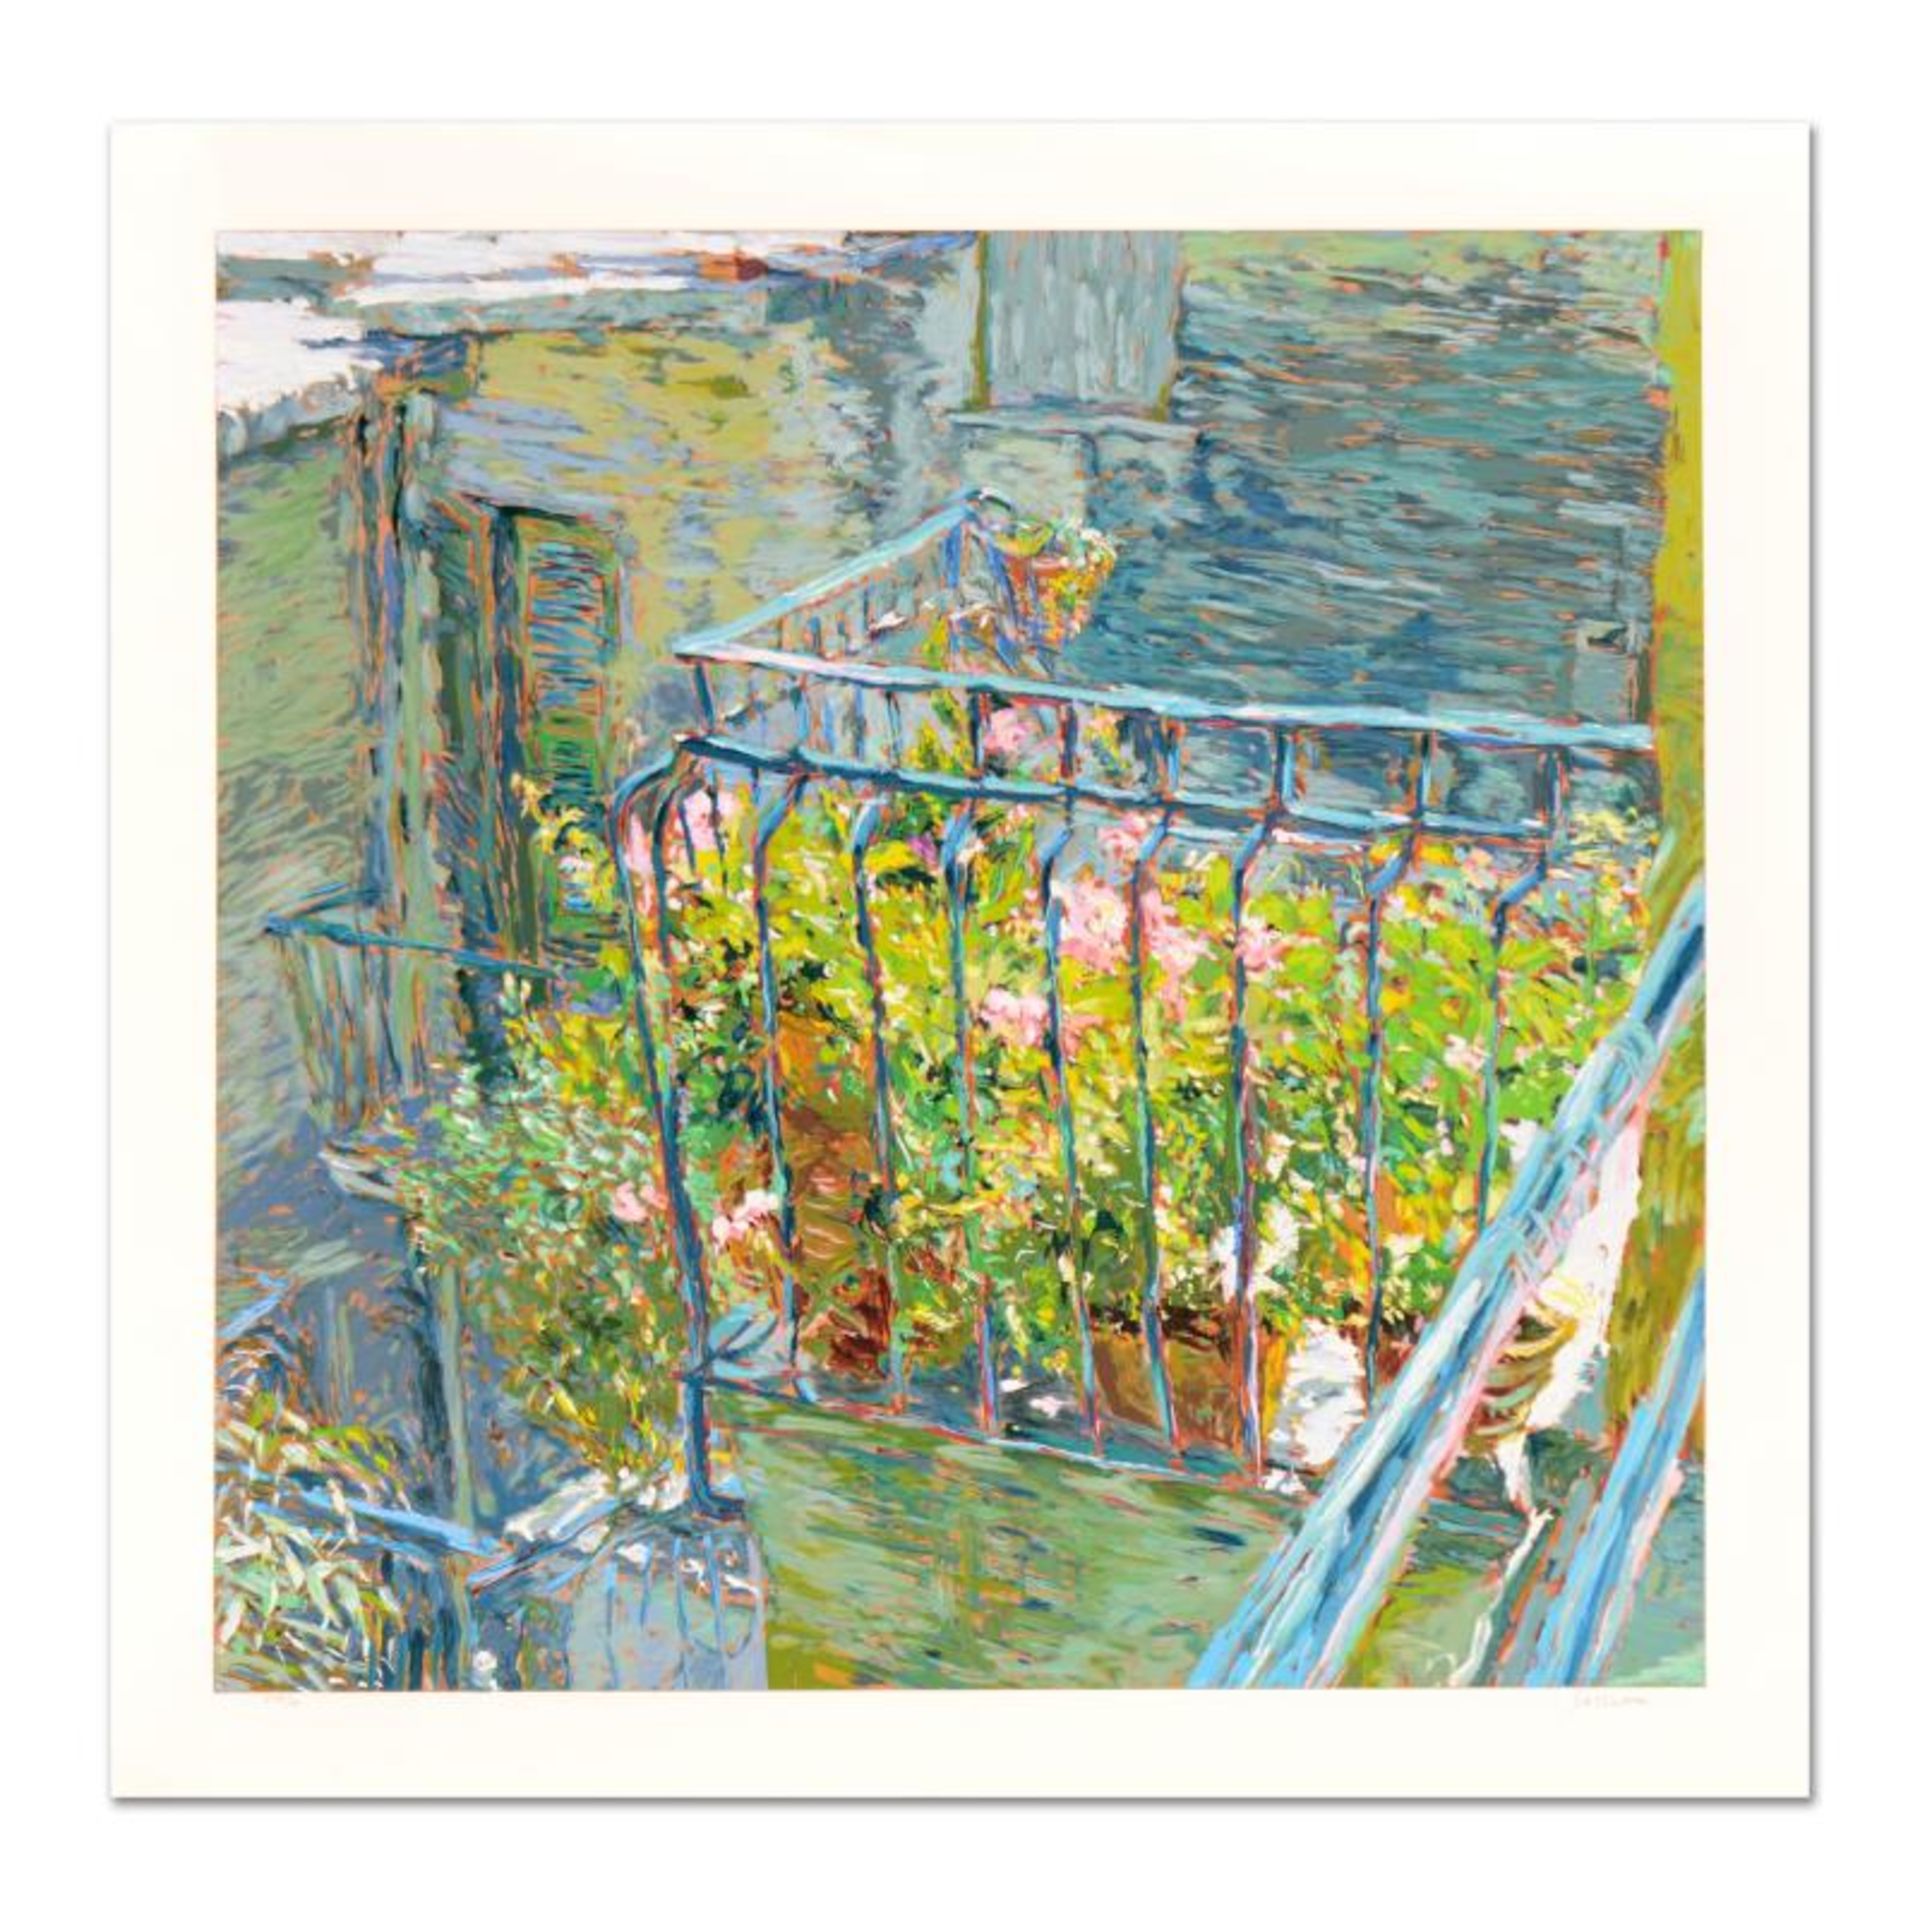 Marco Sassone, "Le Balcon Blueae" Limited Edition Serigraph, Numbered and Hand S